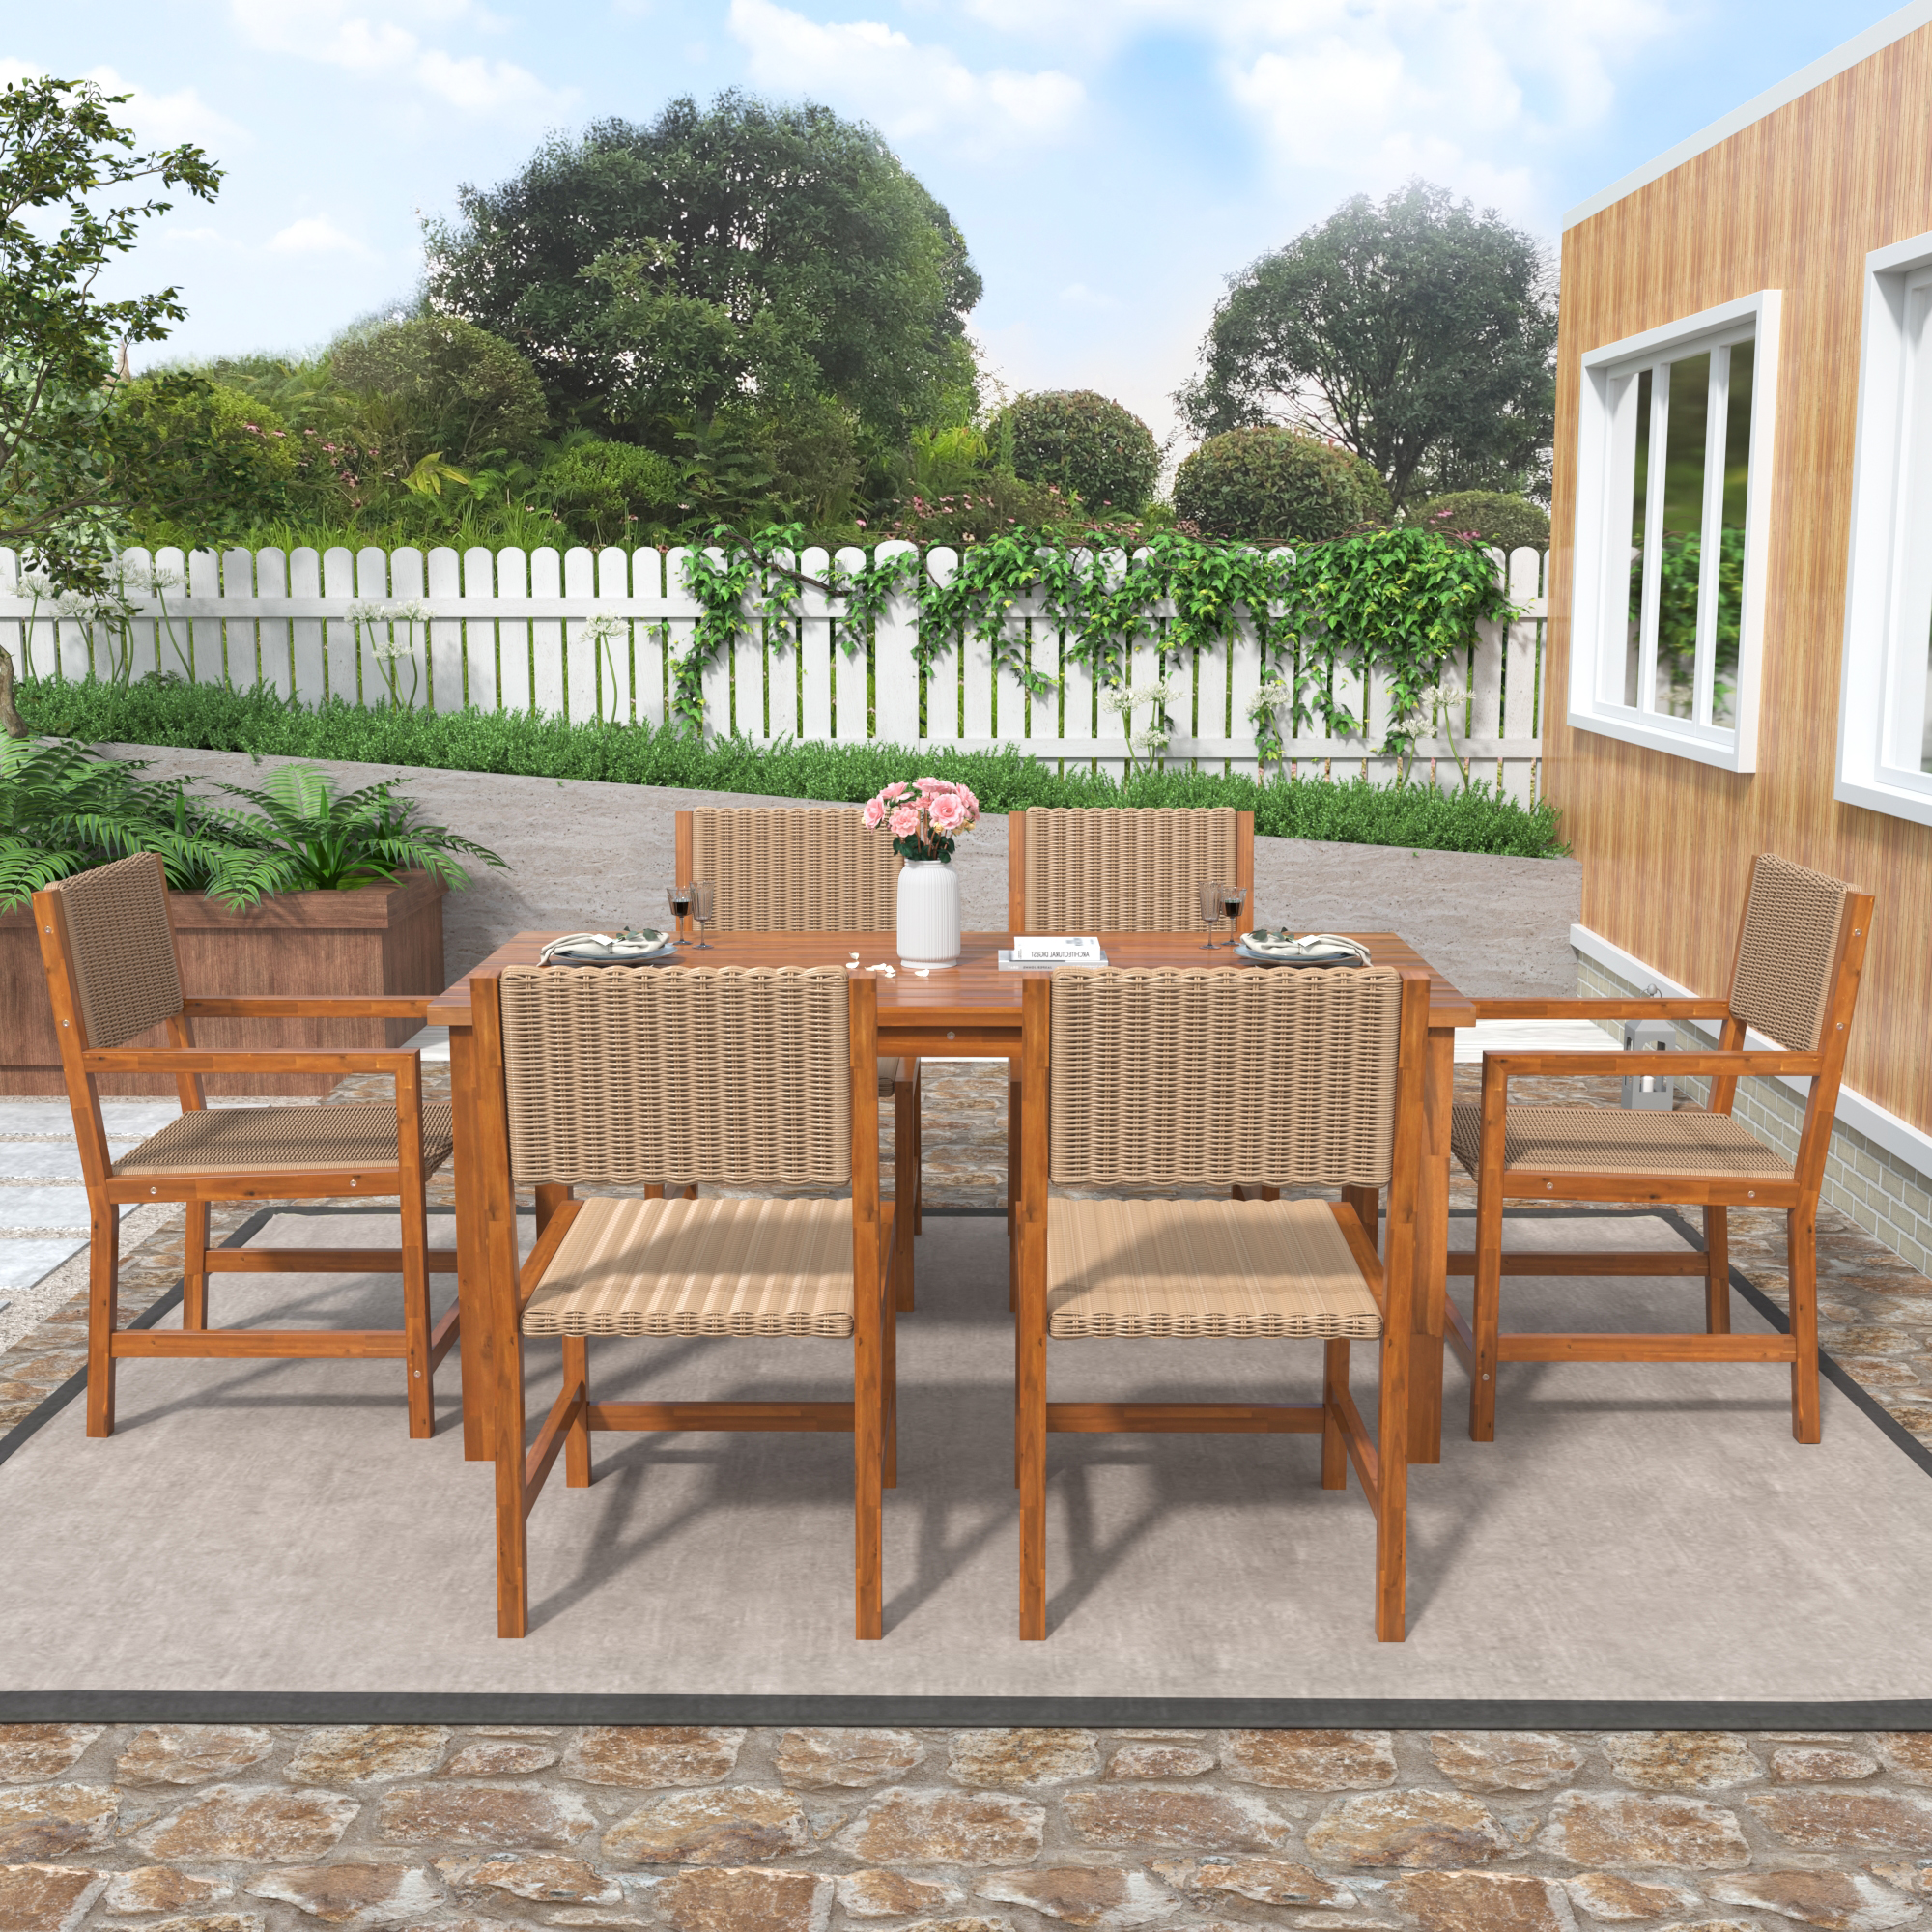 7 Piece Patio Rattan Dining Set, Outdoor Space Saving Rattan Chairs with Acacia Wood Table, All-Weather Dining Table and Chairs Set, HDPE Rattan Dining Chairs Set for Balcony Patio Garden Poolside - image 2 of 8